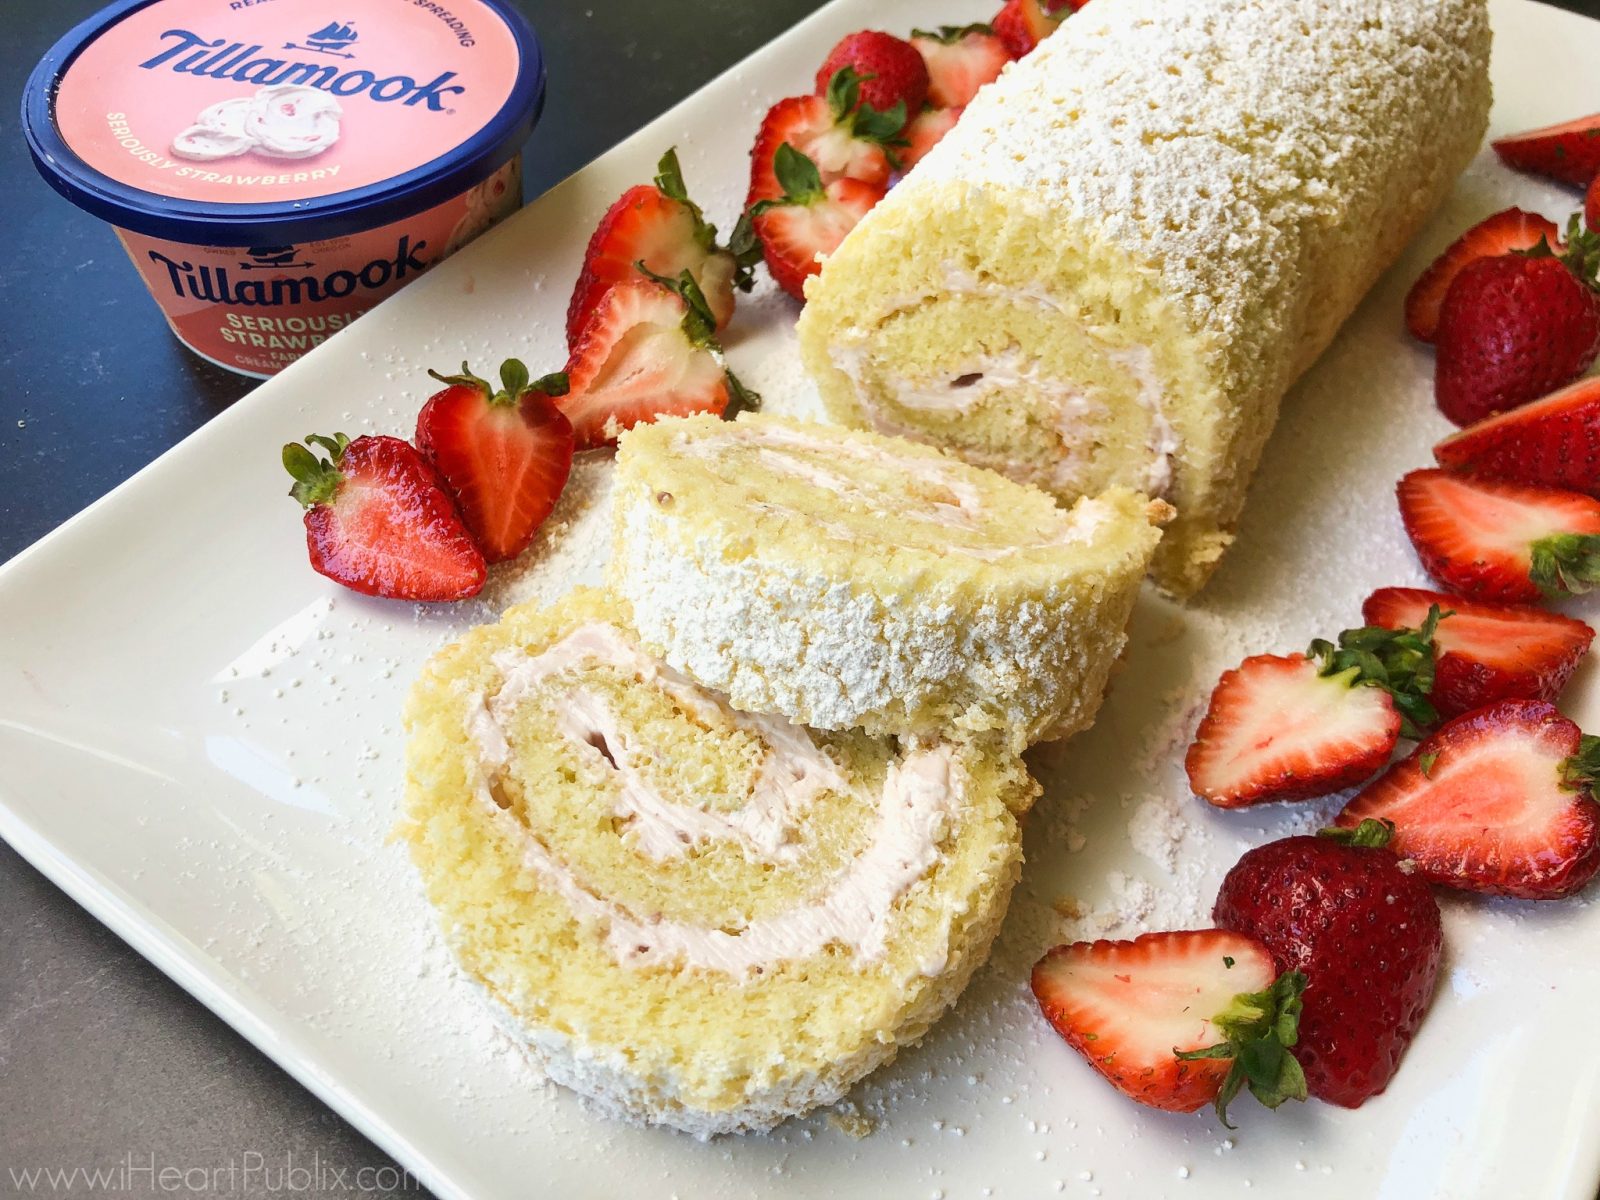 Seriously Strawberry Cheesecake Cake Roll – Tasty Dessert Made With Tillamook Cream Cheese Spread (Save Now At Publix)